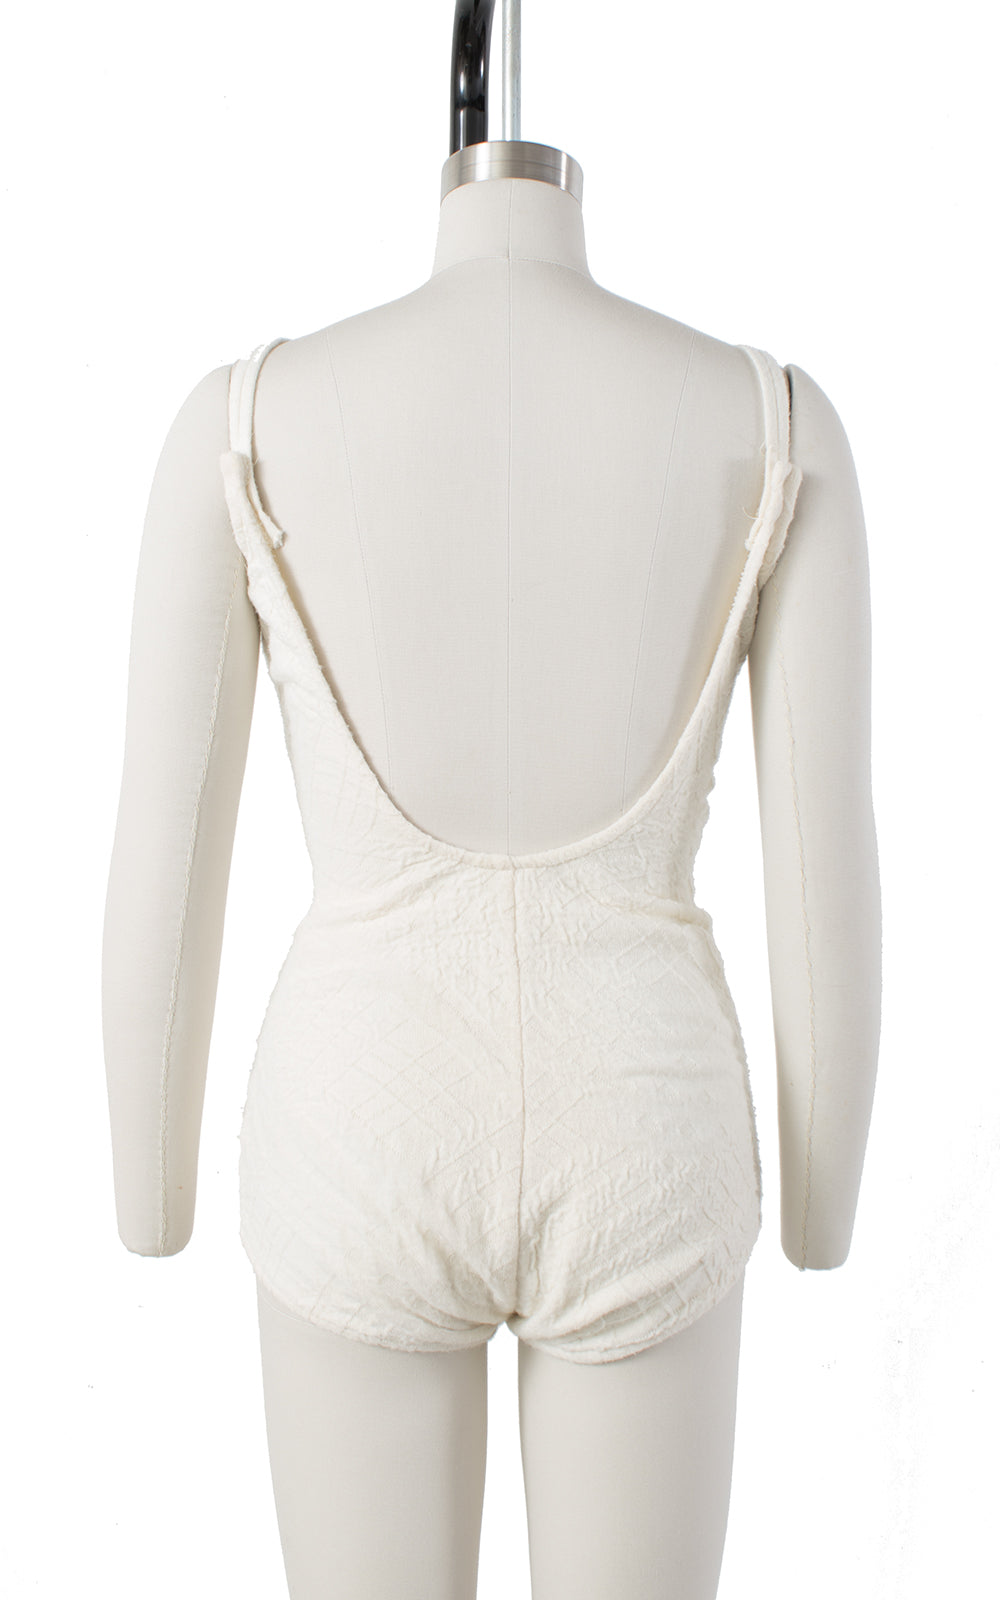 1960s Catalina White Knit Open Back Swimsuit